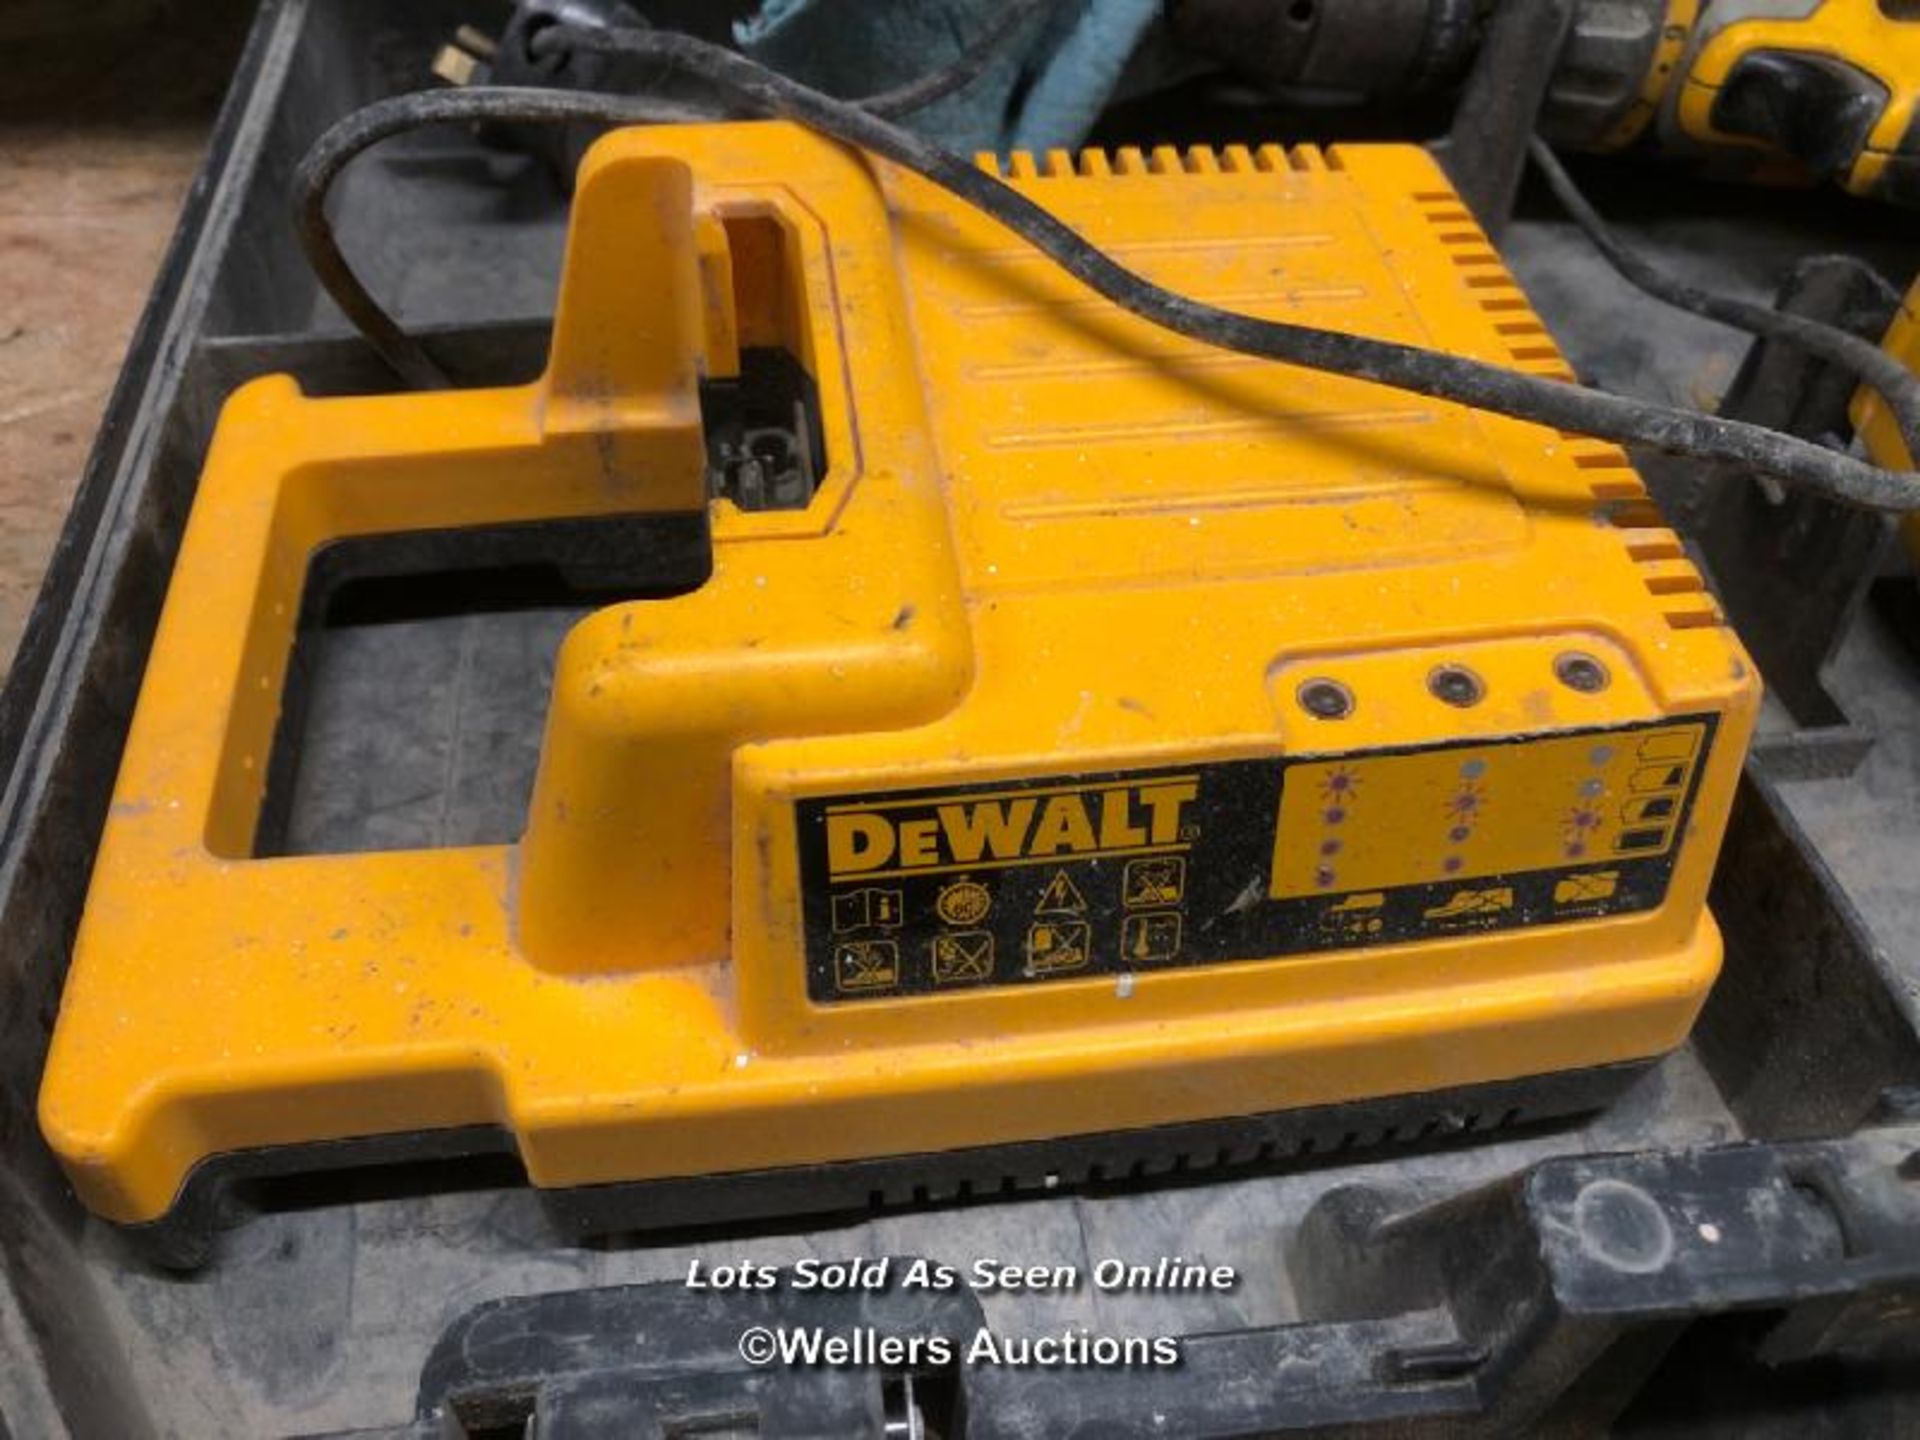 DEWALT DRILL, WITH BATTERY AND CHARGER, IN CASE - Image 3 of 3